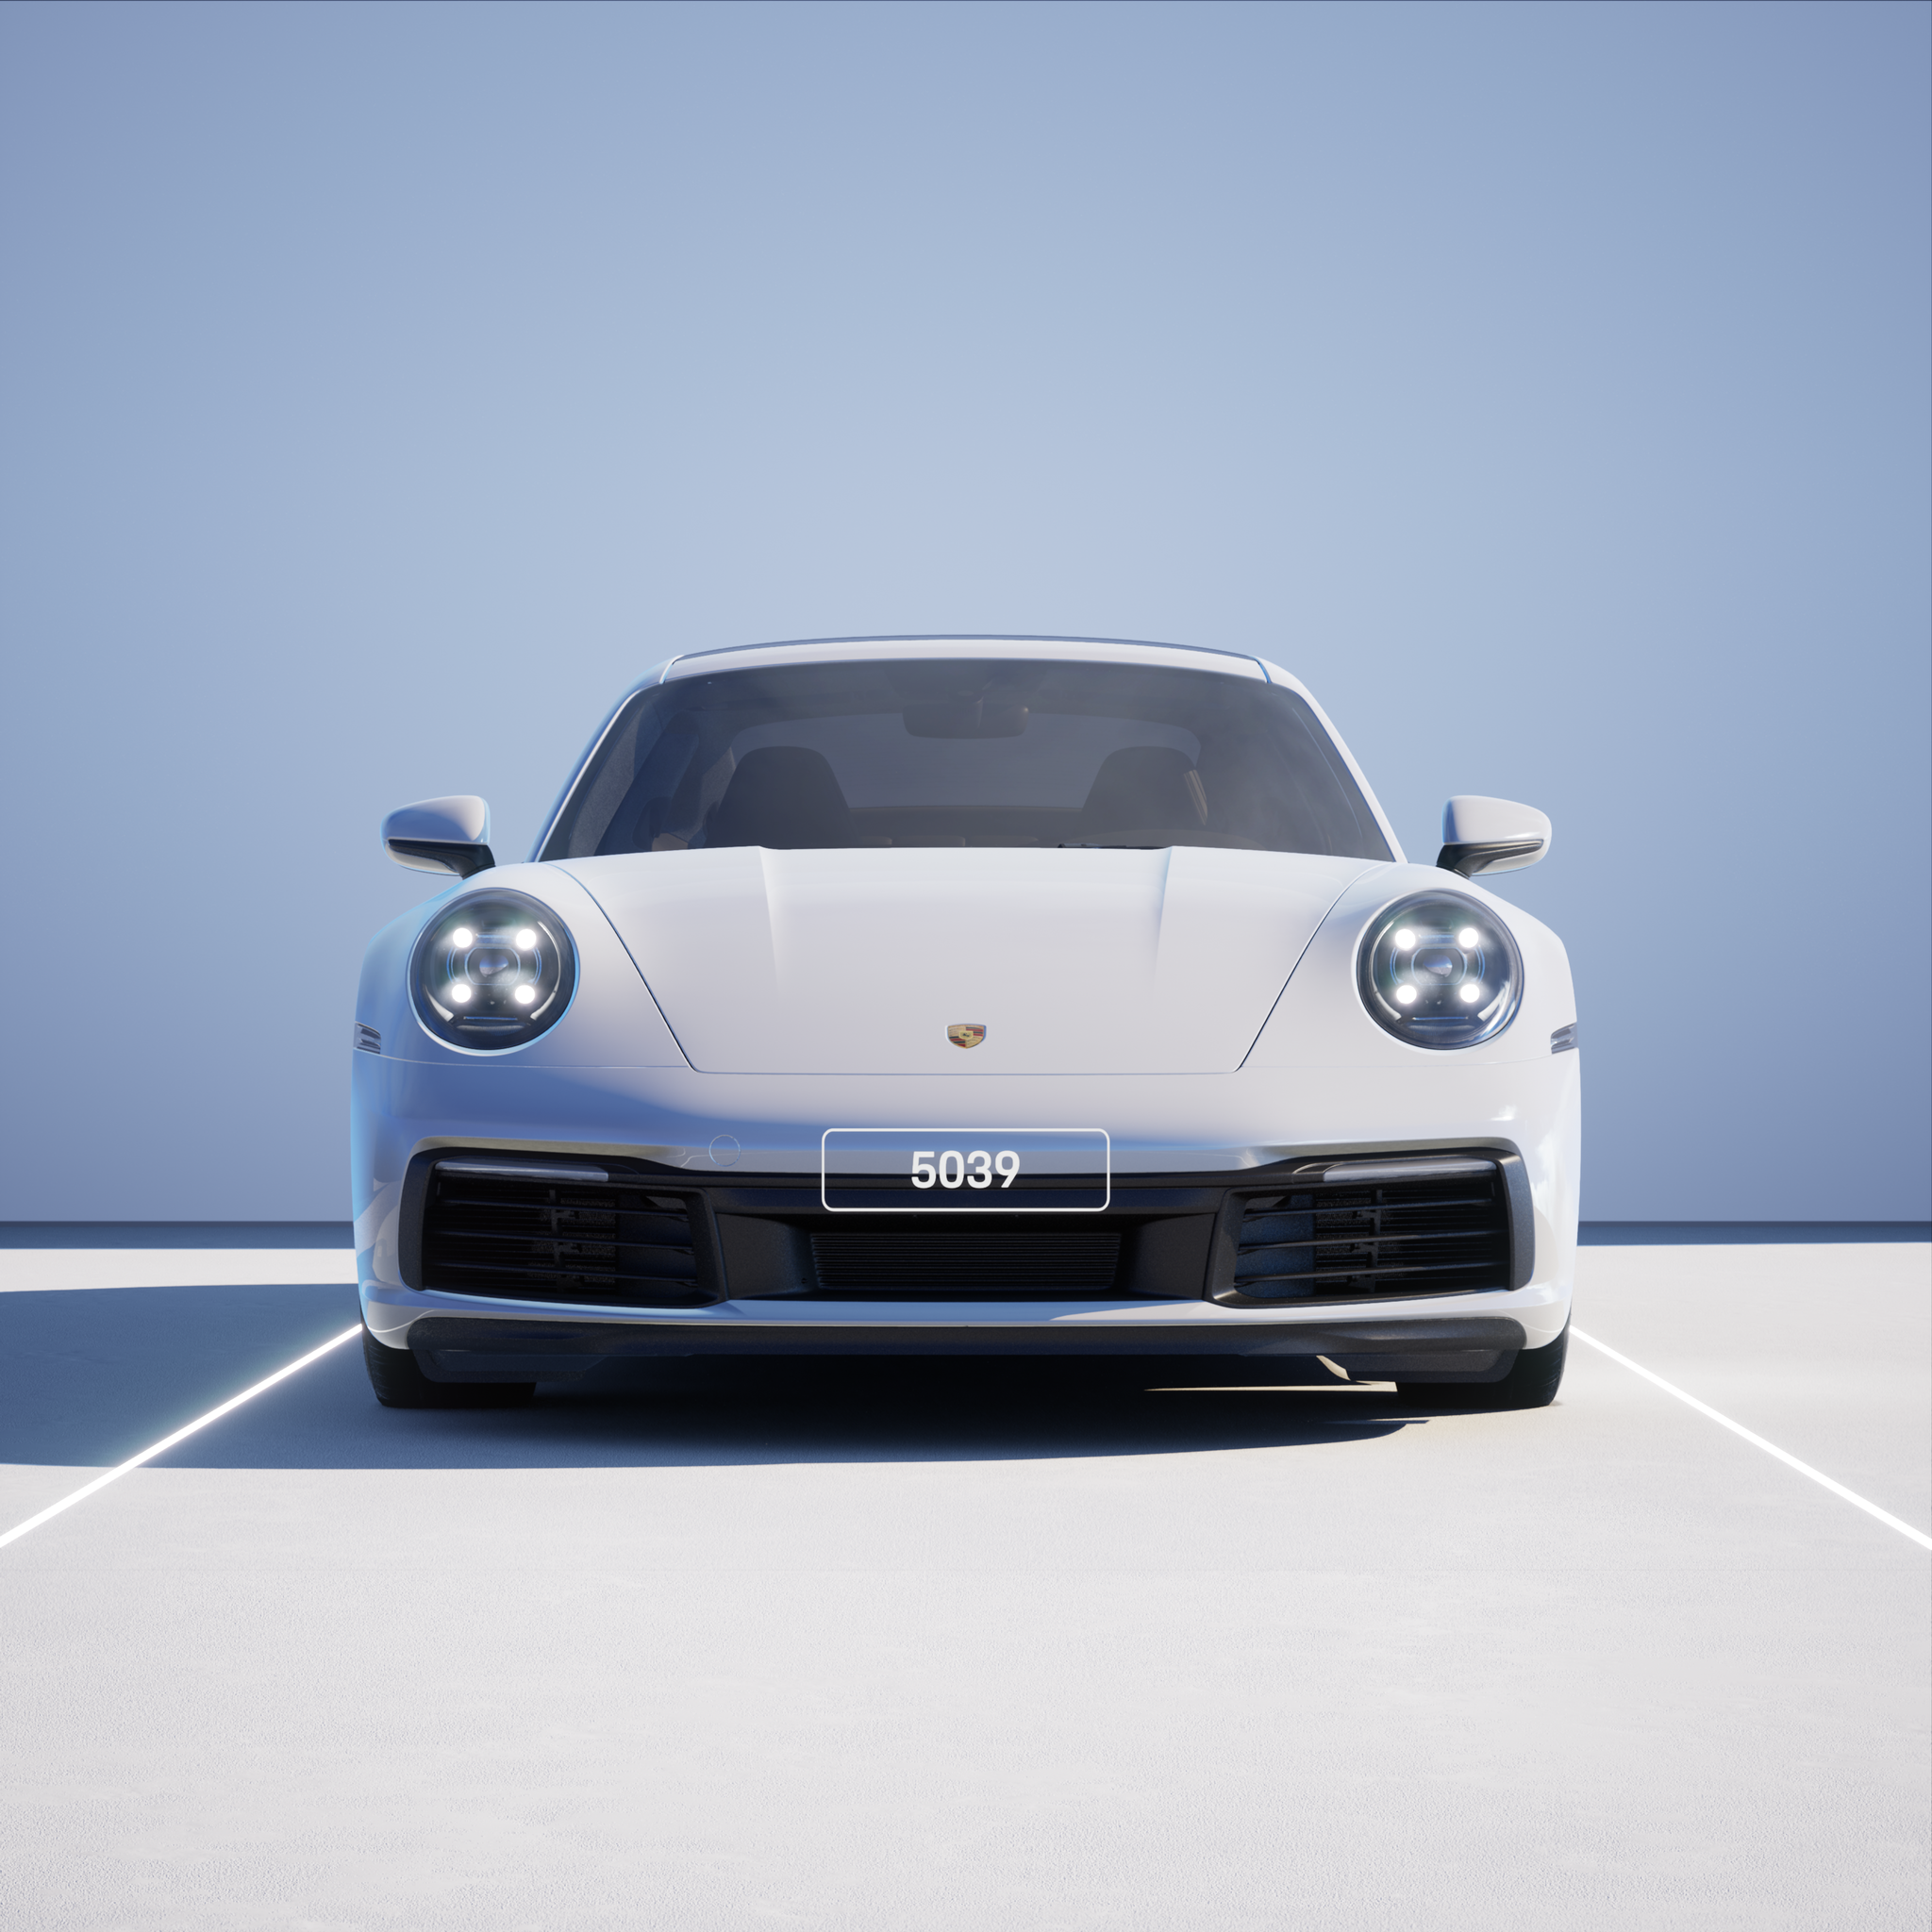 The PORSCHΞ 911 5039 image in phase